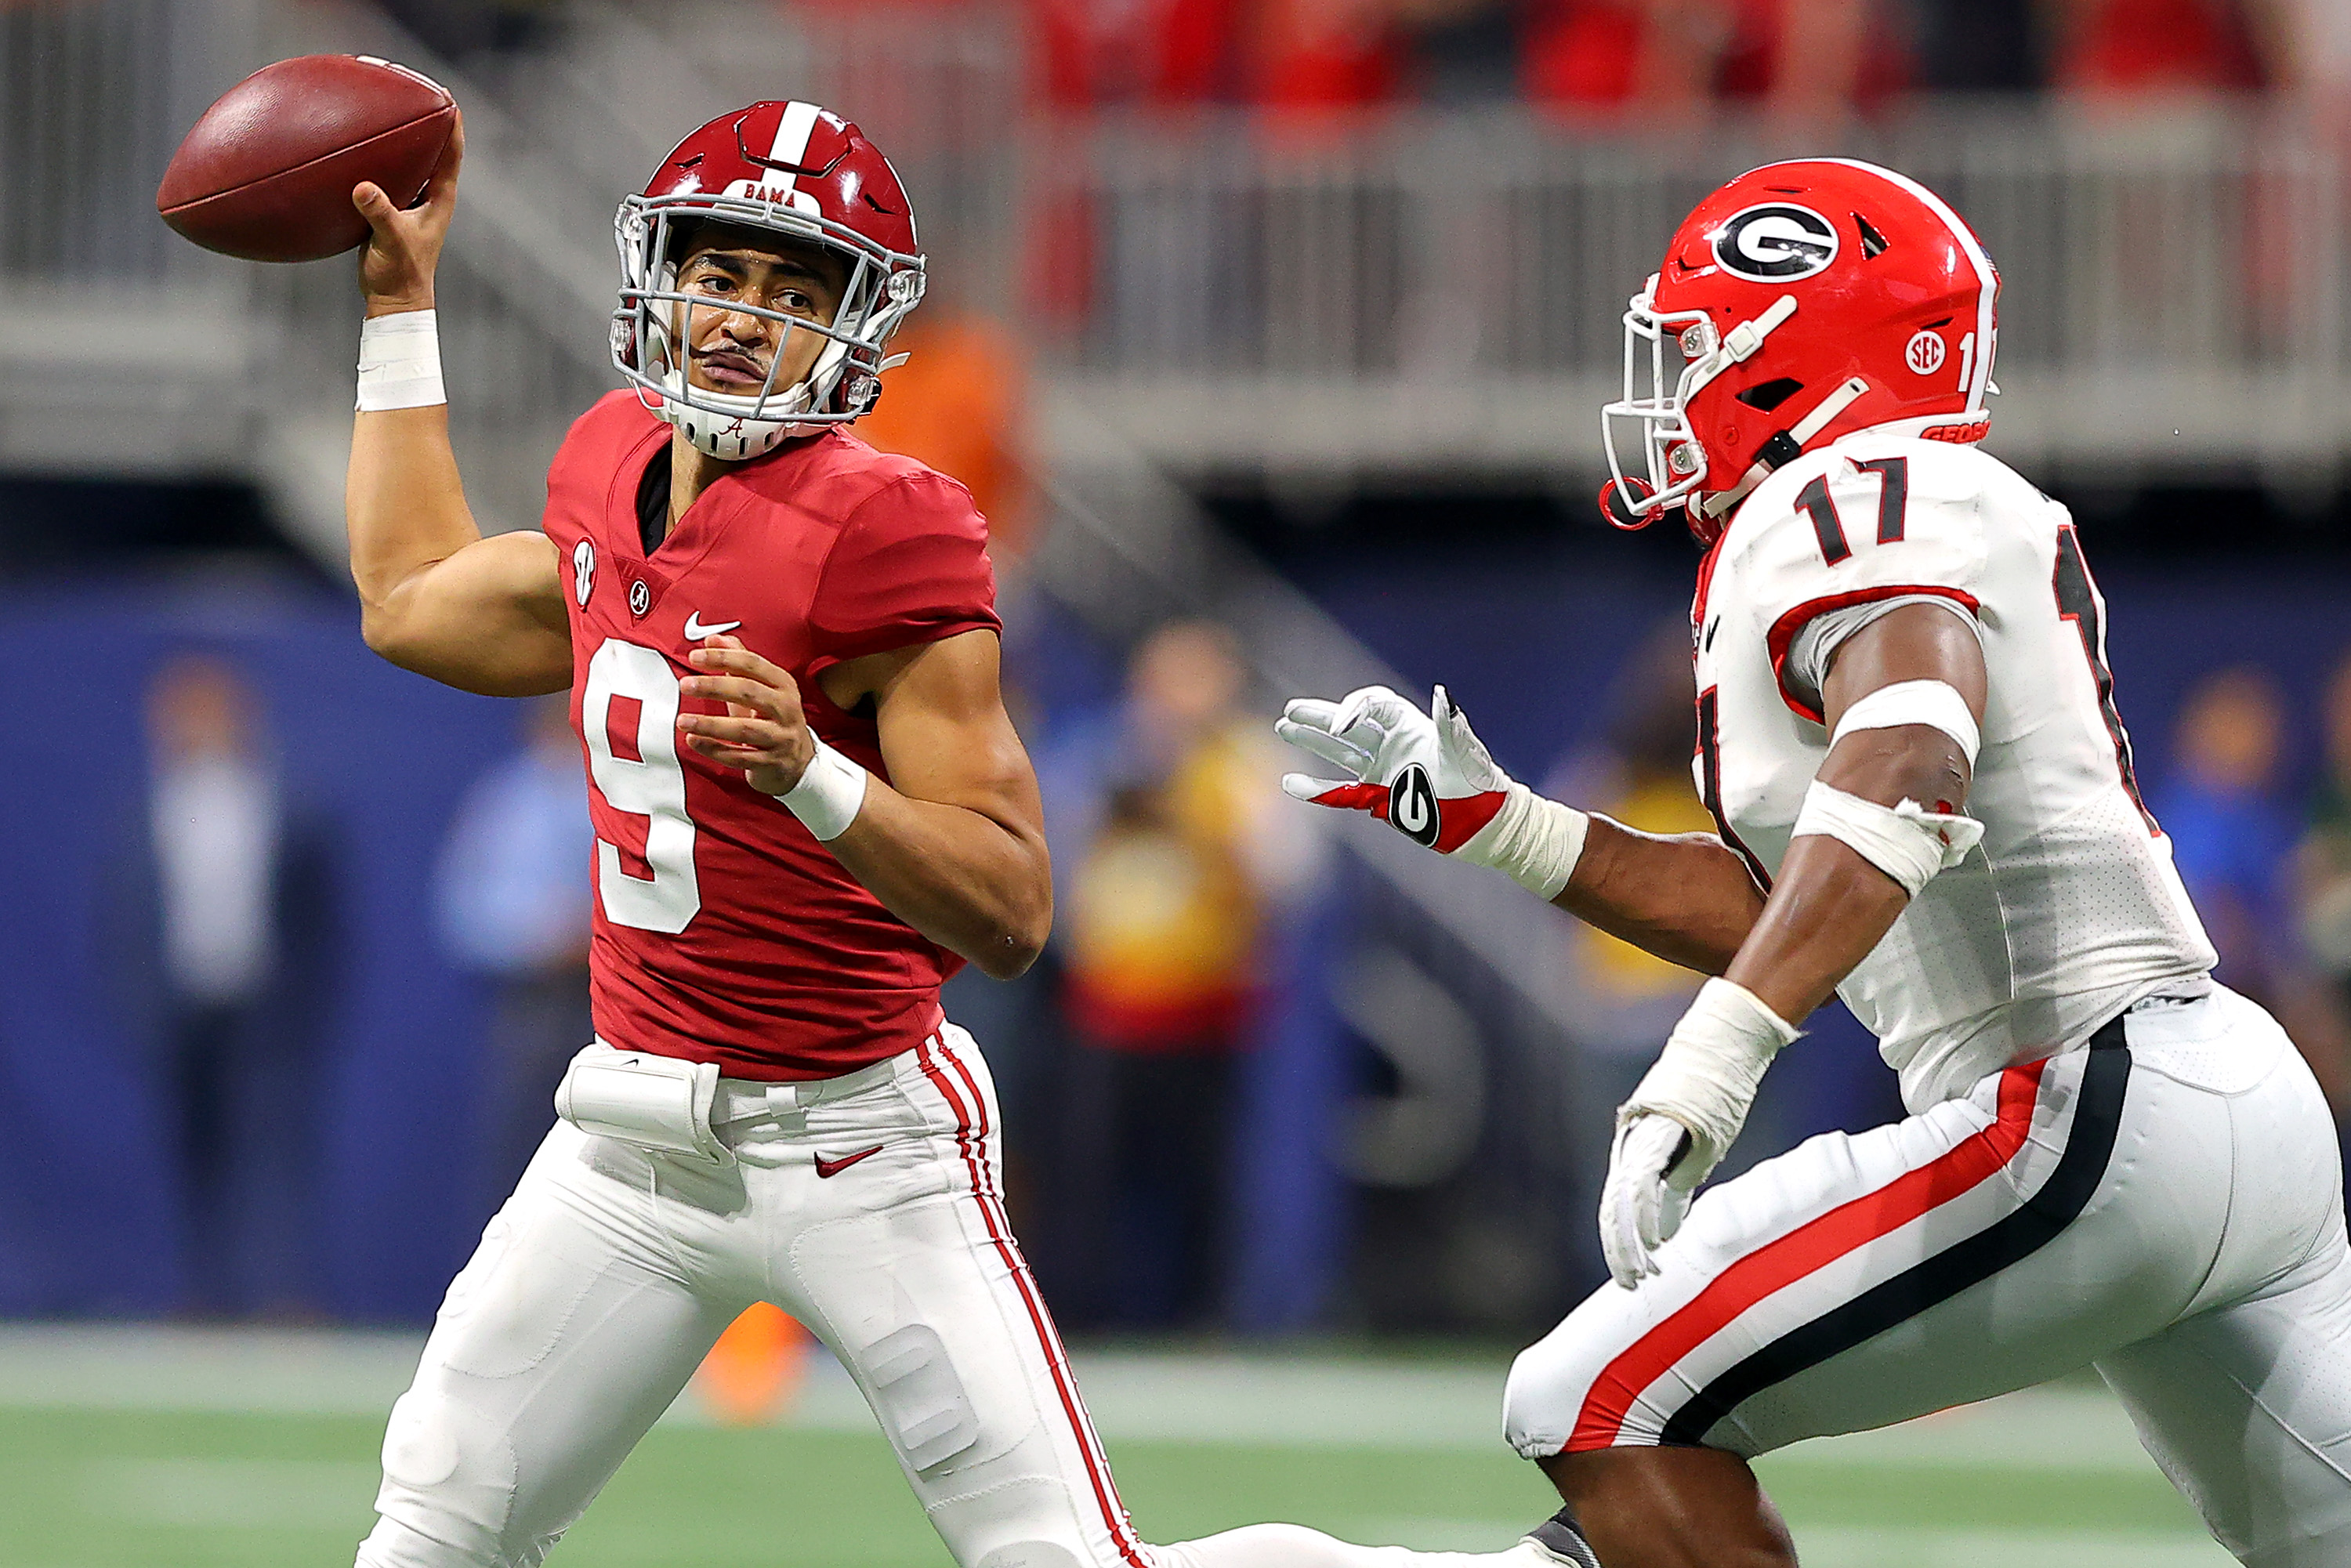 National Championship 2022: Georgia vs Alabama Date, Time, TV, Location & History for CFP Title Game